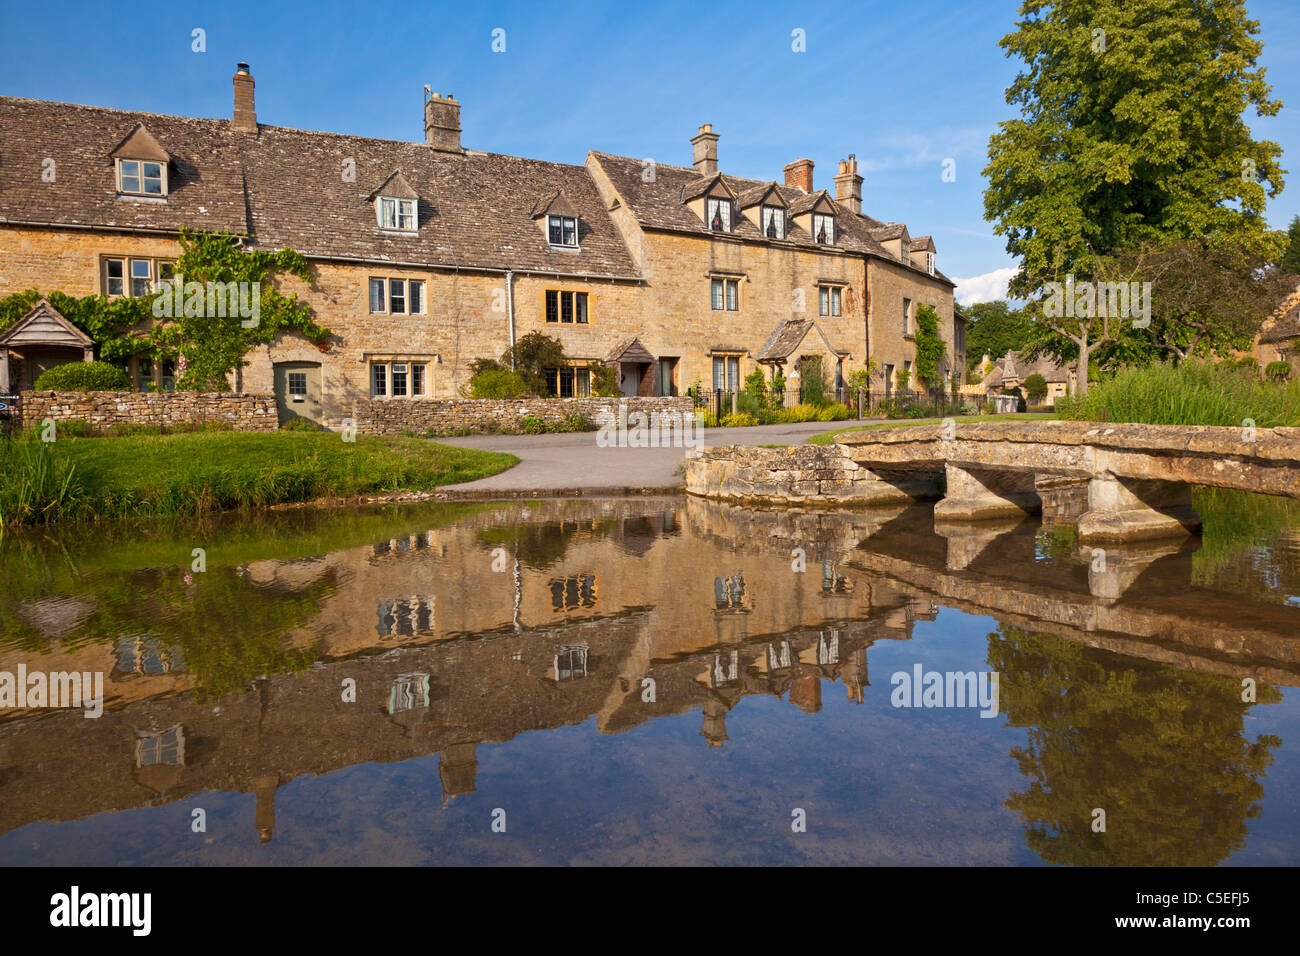 Cotswolds village of Lower Slaughter with quaint Cotswolds cottages Lower Slaughter The Slaughters the Cotswolds Gloucestershire England UK GB Europe Stock Photo